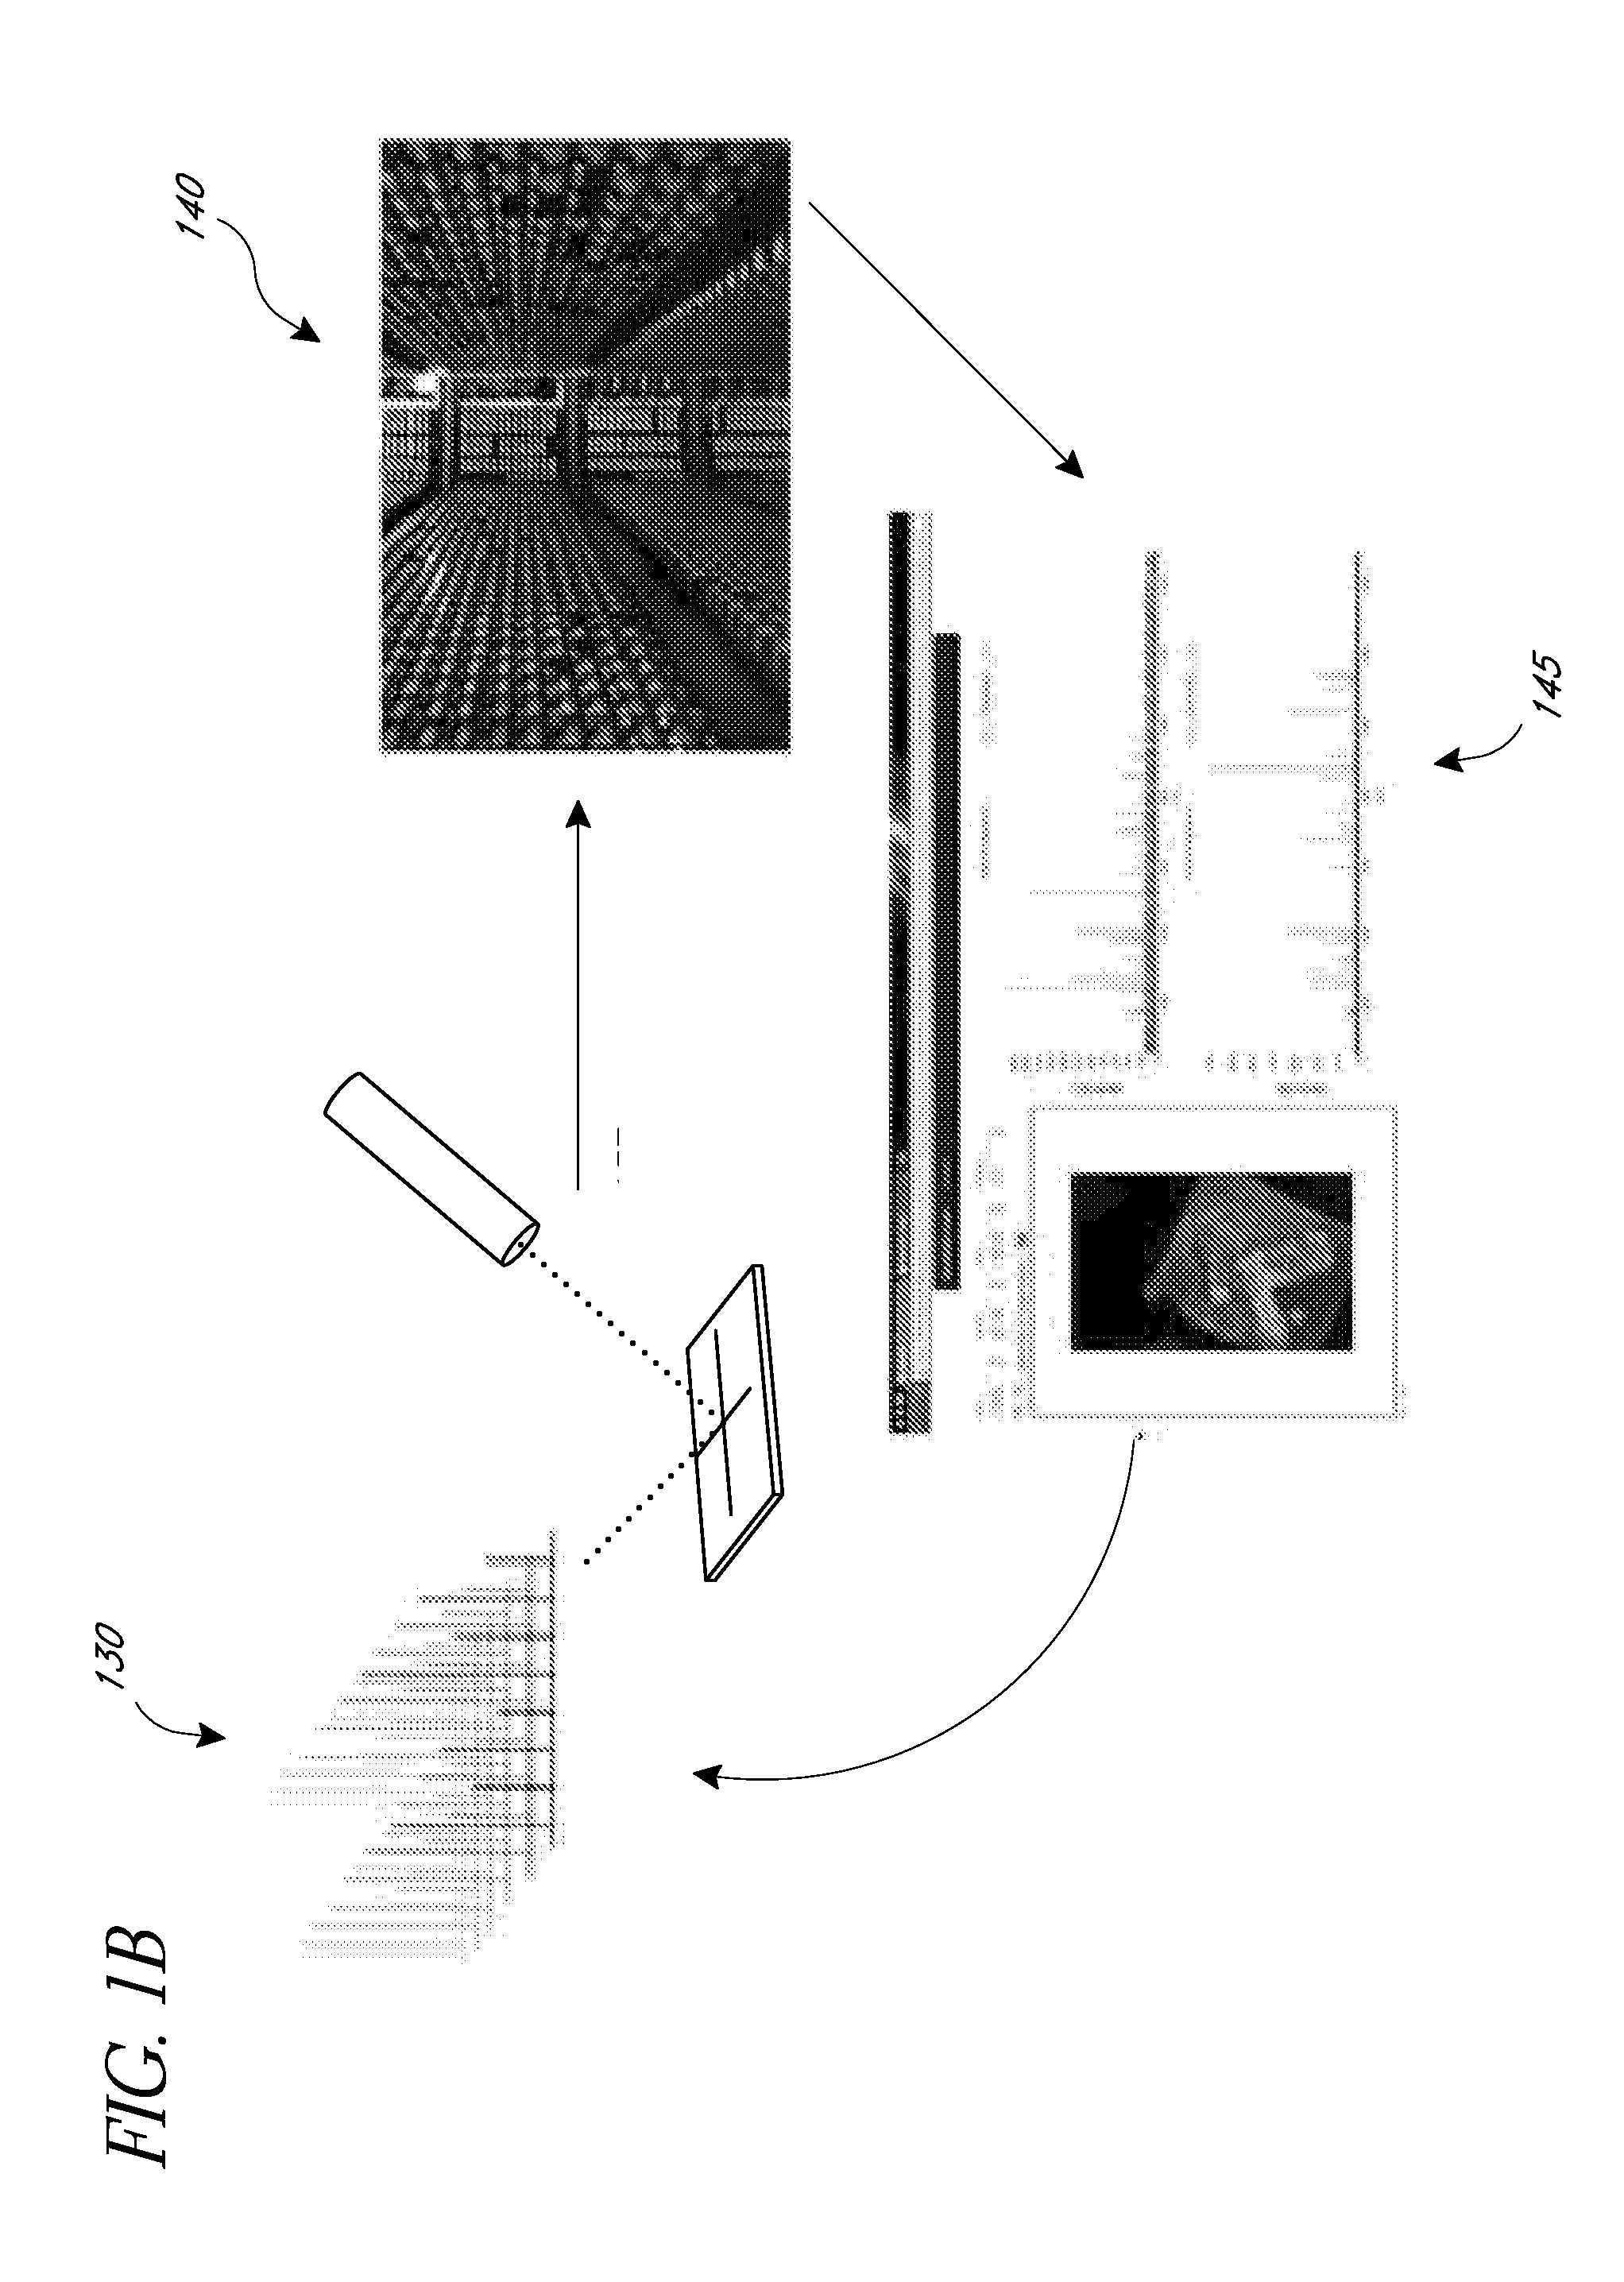 System and method of managing large data files